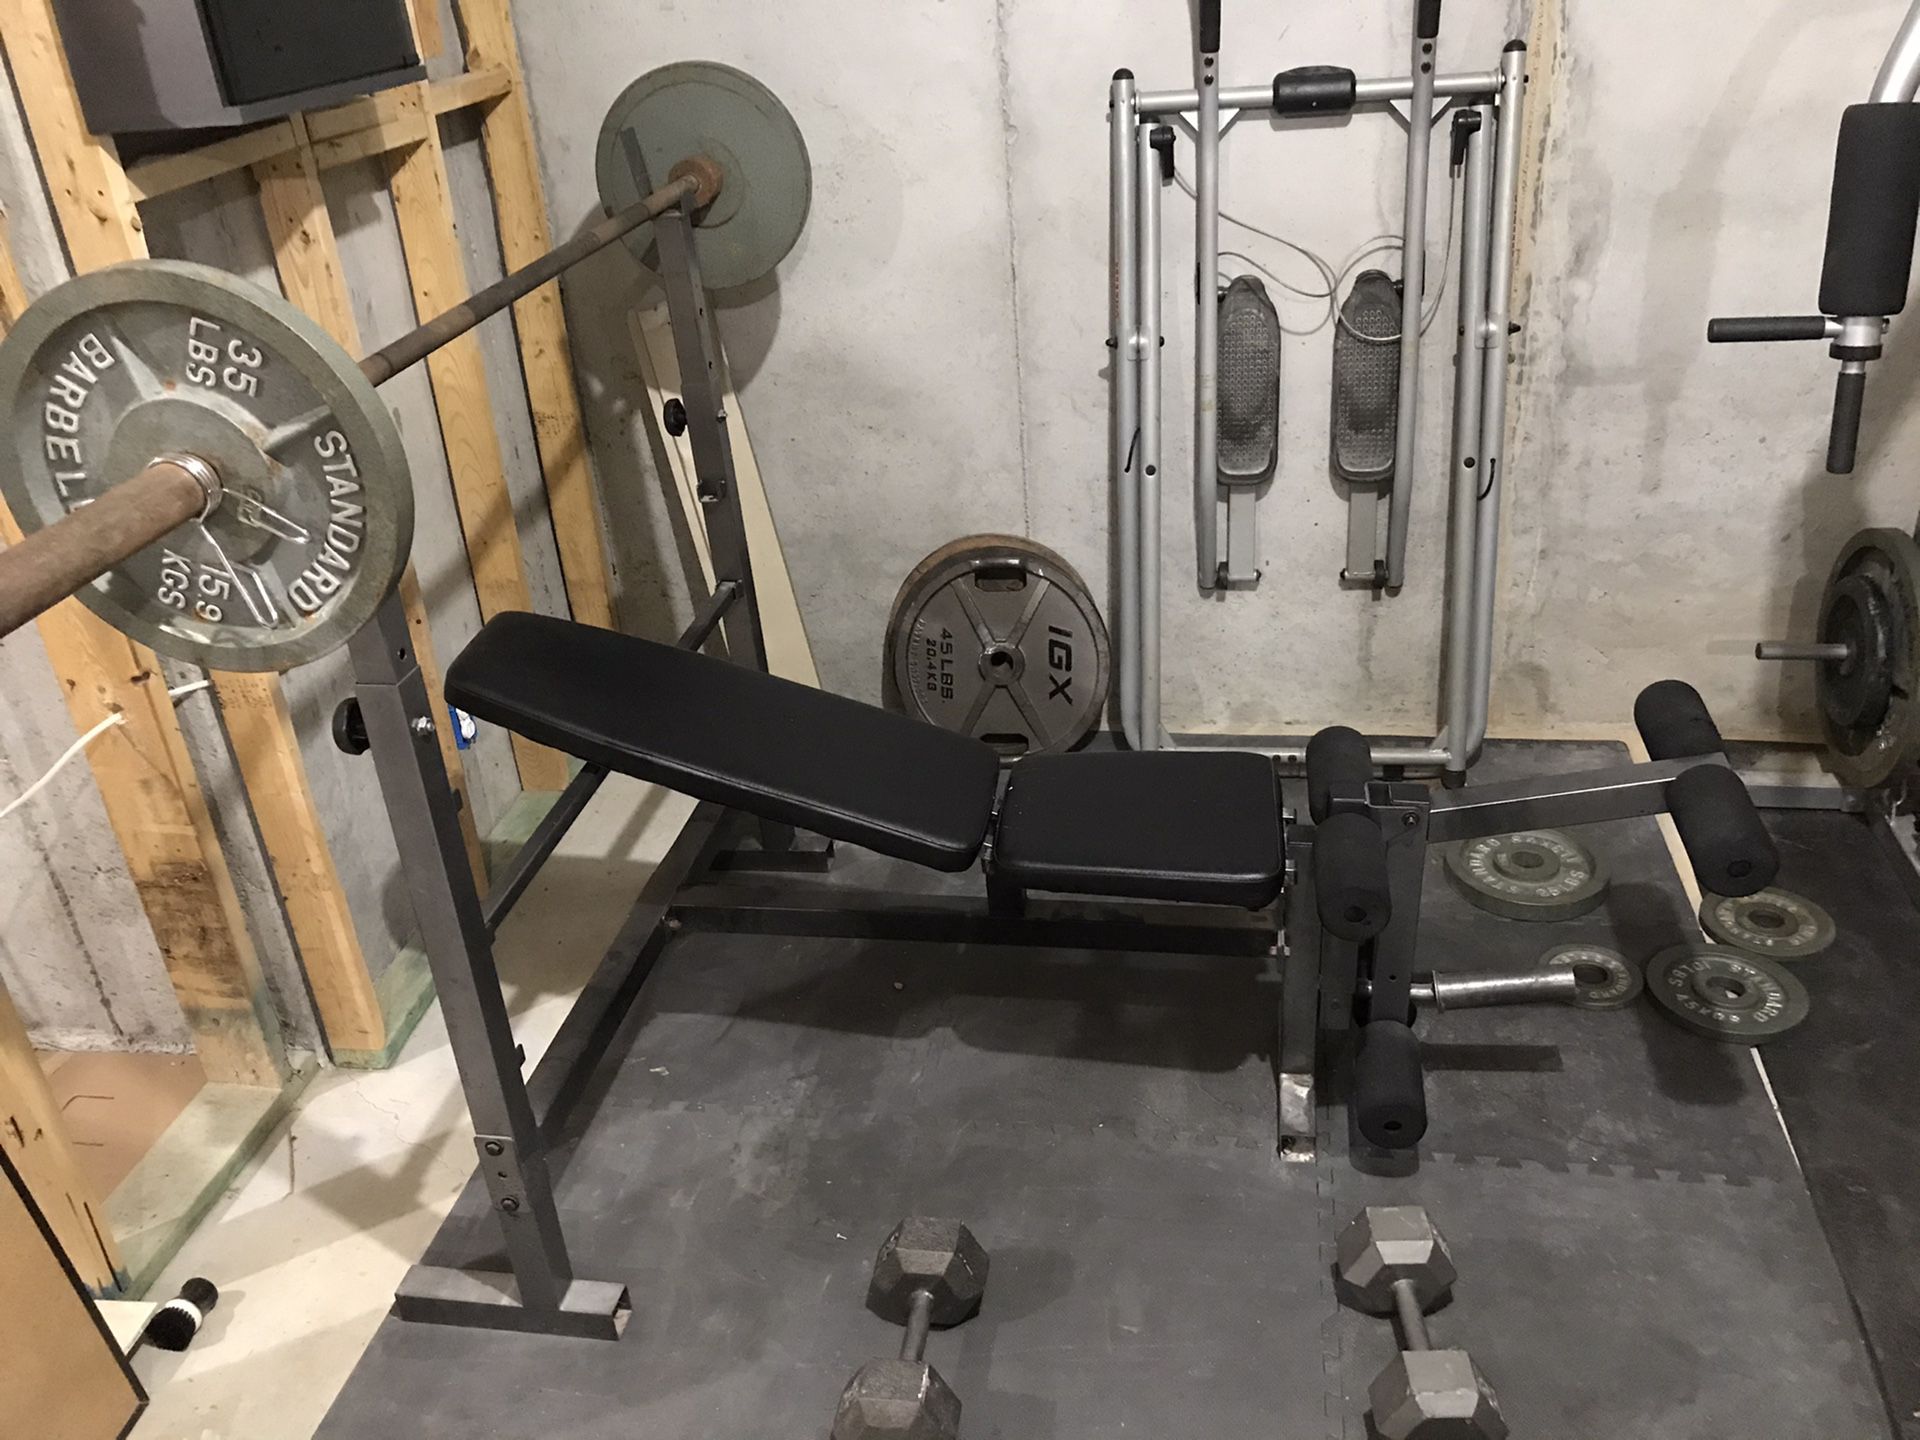 WEIGHT BENCH WITH 4 - 45LB WEIGHTS & A 45LB BAR